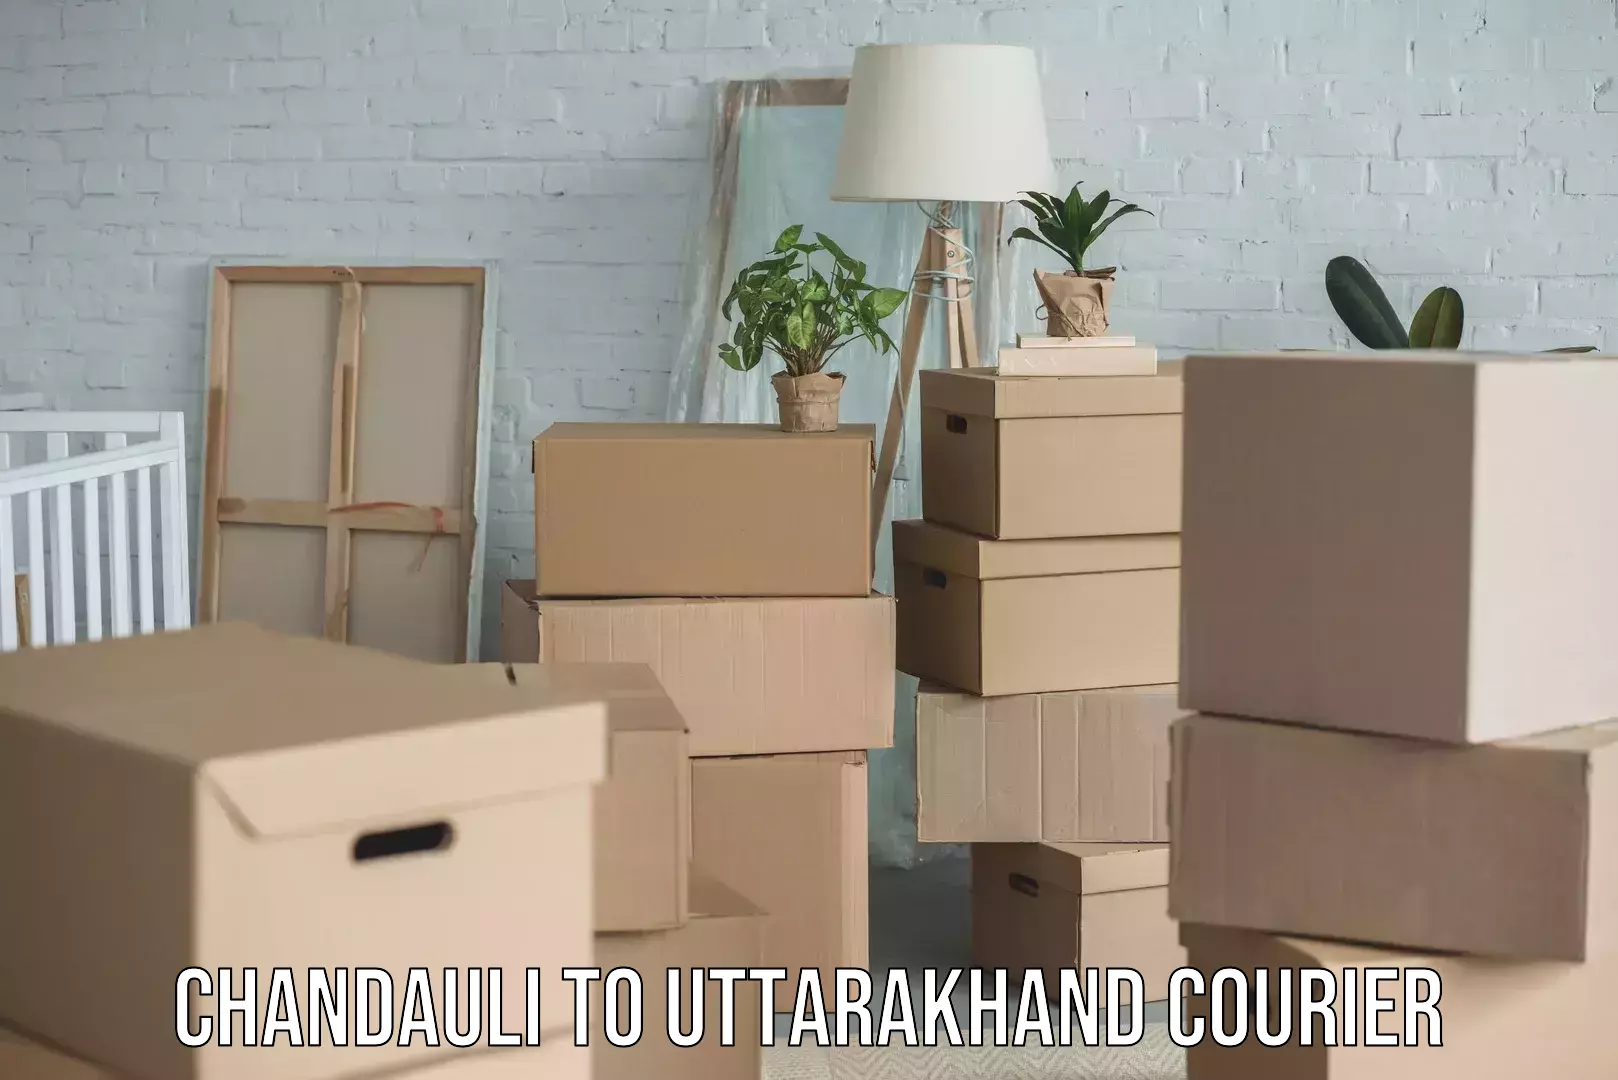 Same-day delivery solutions Chandauli to Uttarakhand